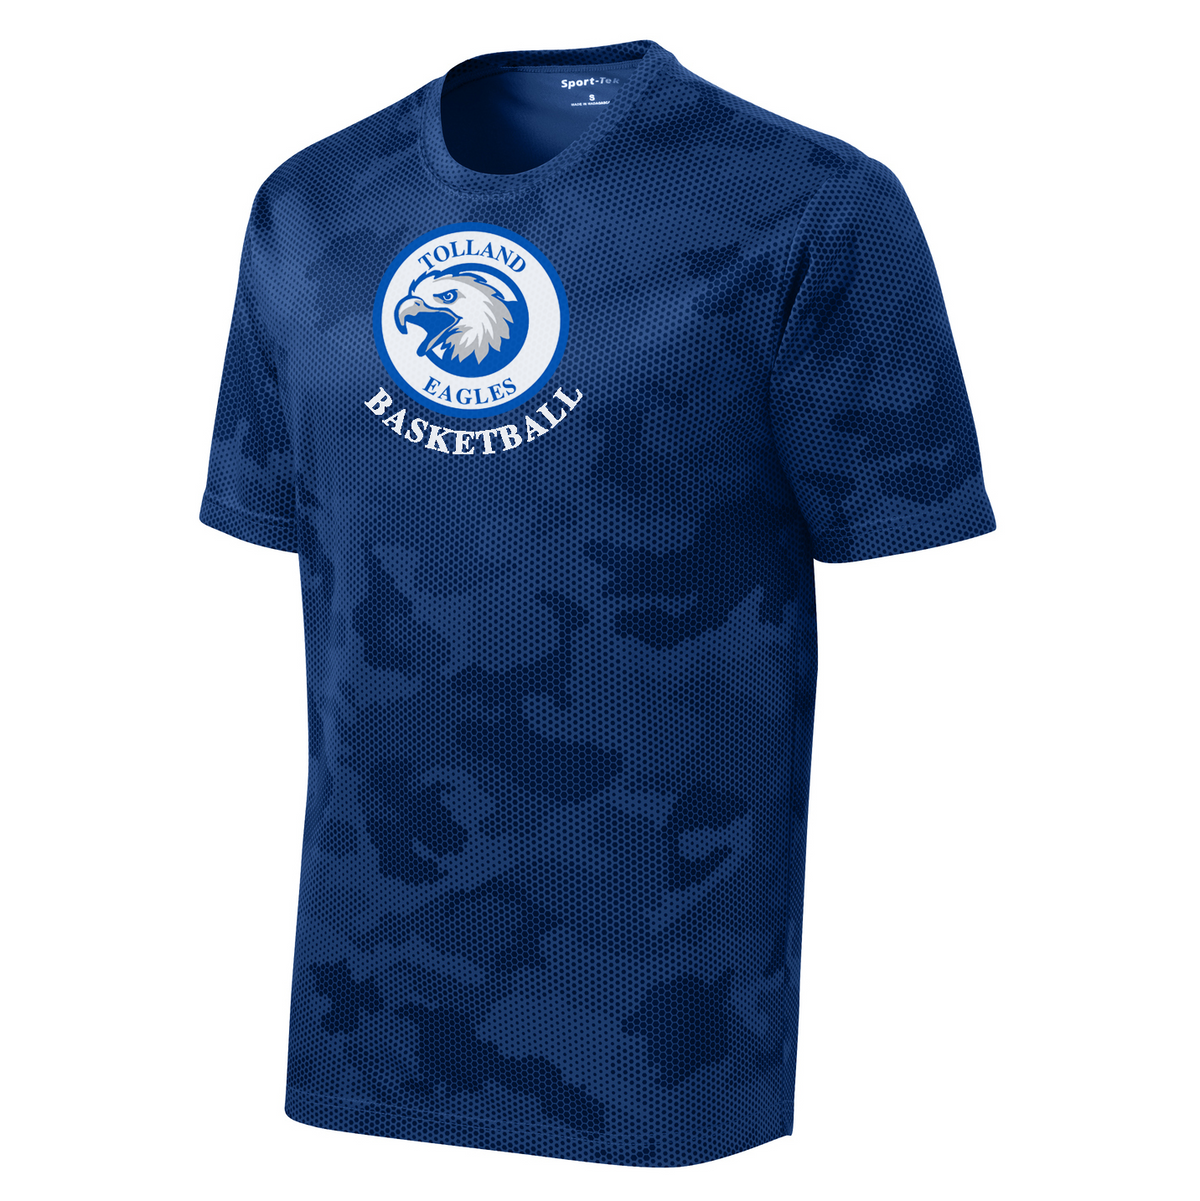 Tolland Travel Basketball CamoHex Tee